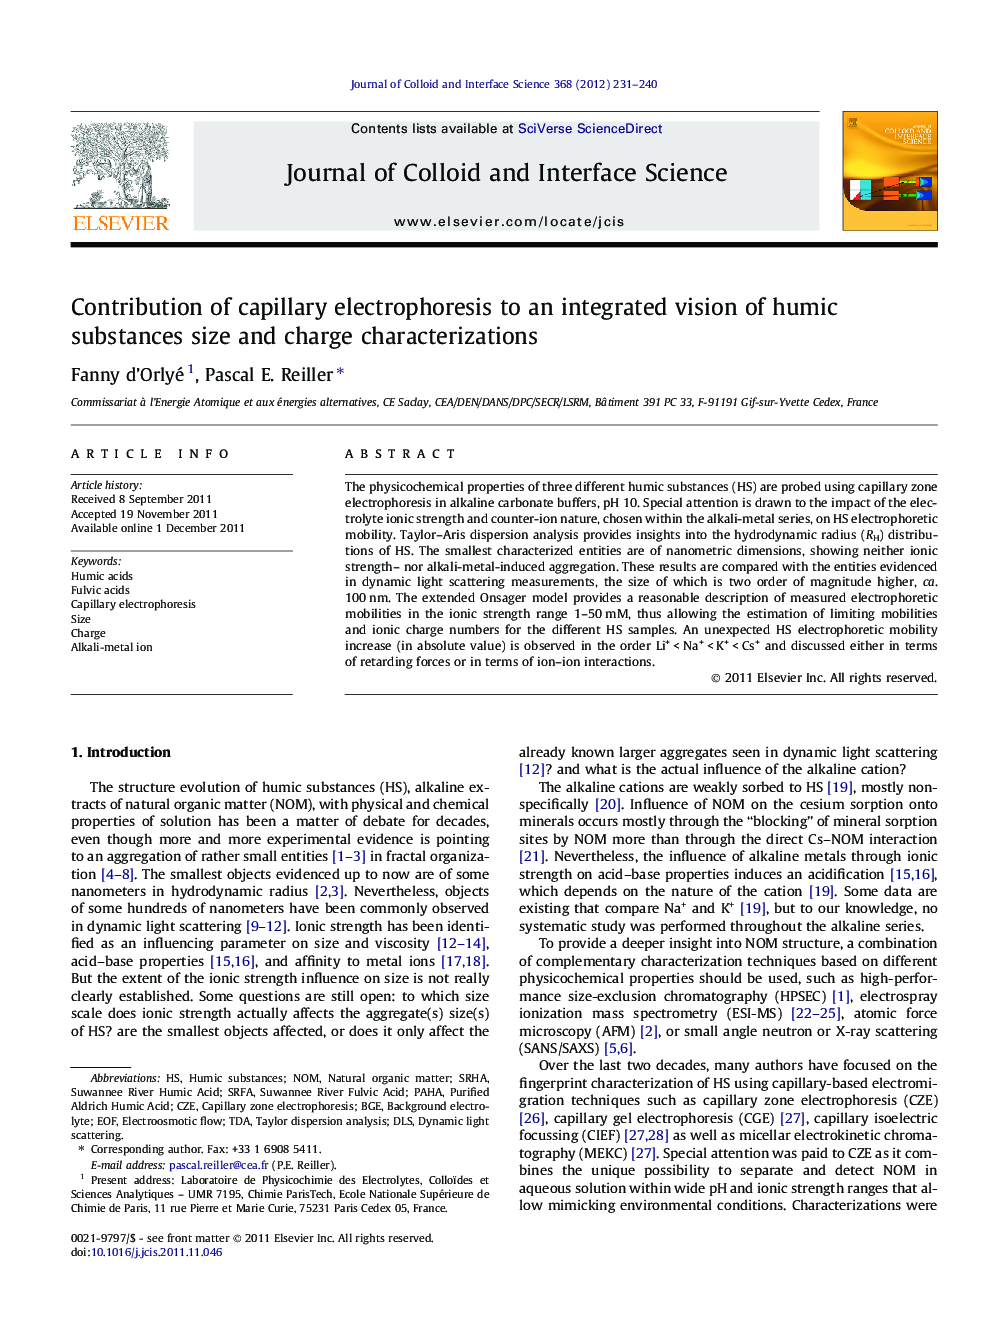 Contribution of capillary electrophoresis to an integrated vision of humic substances size and charge characterizations